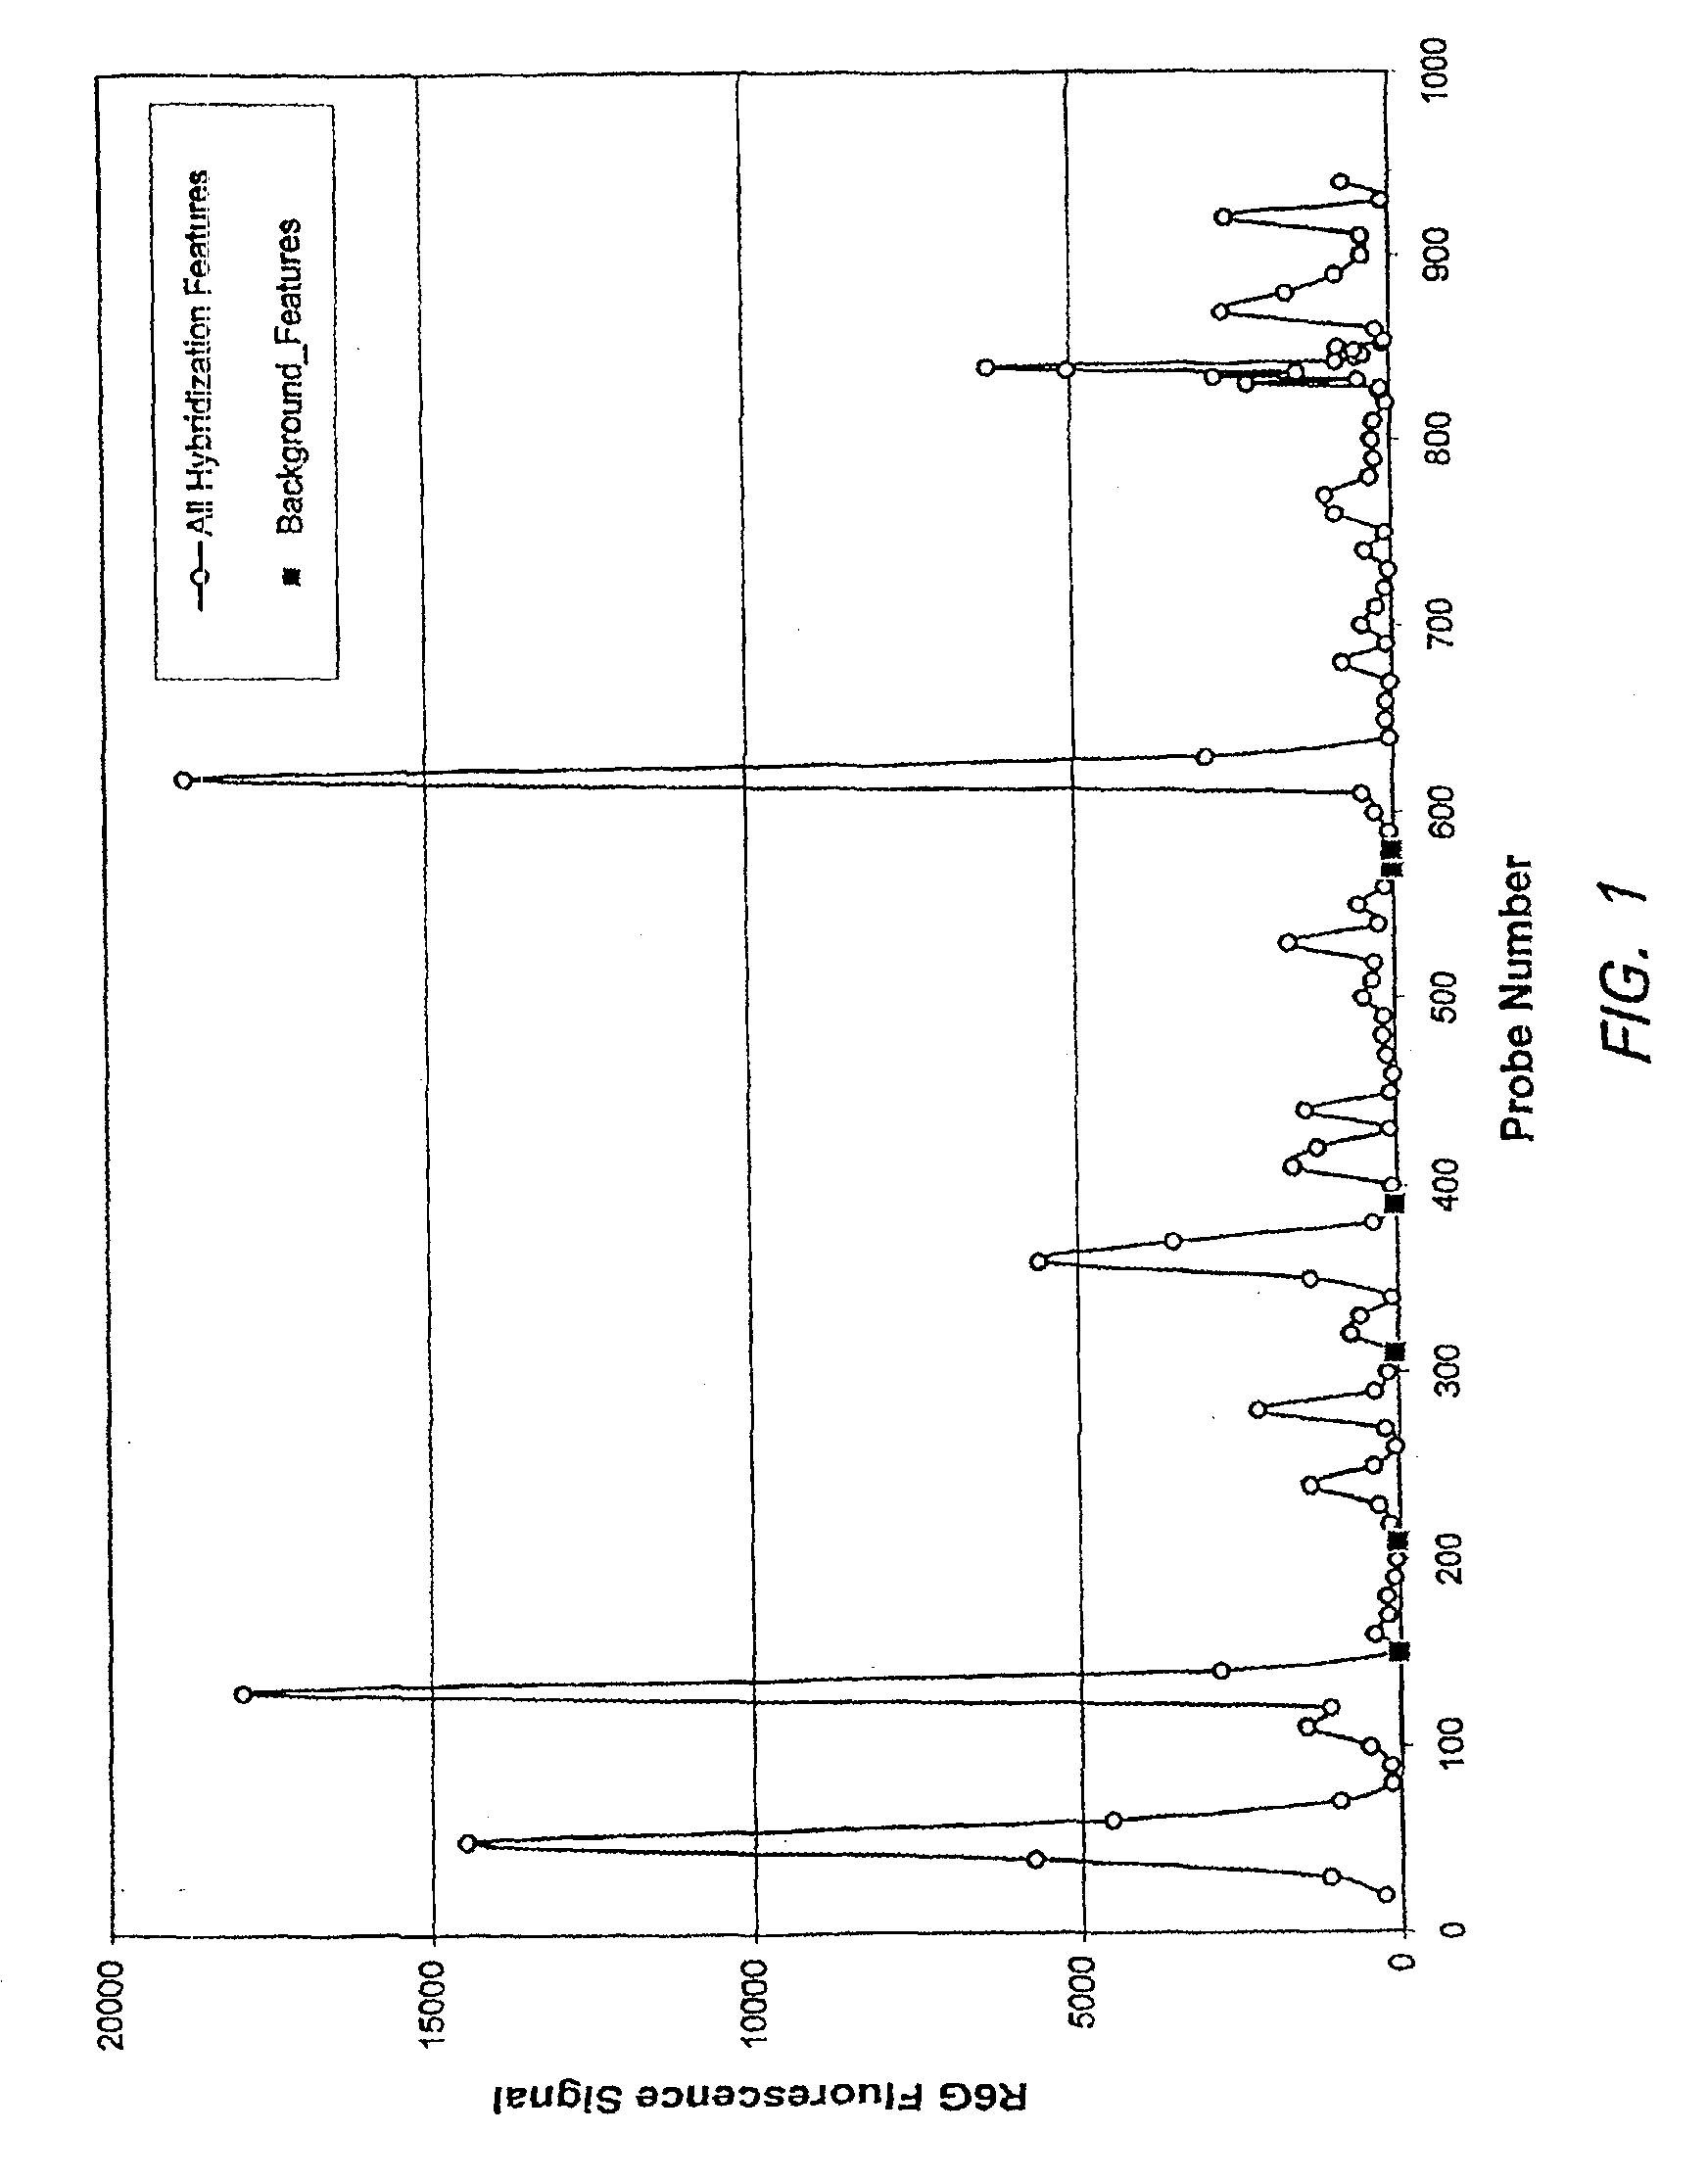 Arrays comprising background features that provide for a measure of a non-specific binding and methods for using the same